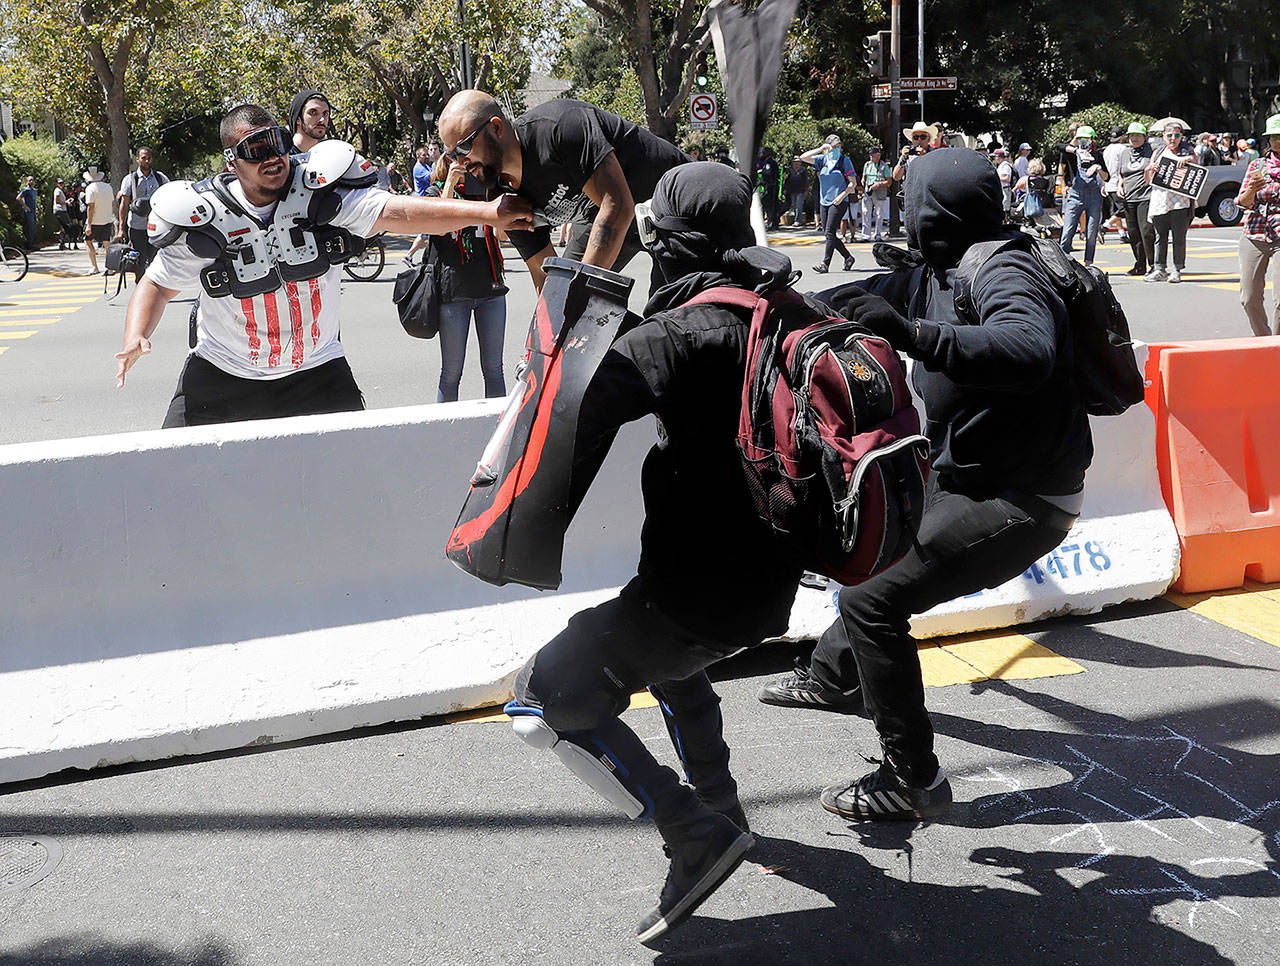 Demonstrator Joey Gibson (second from left) is chased by anti-fascists during a free speech rally Sunday in Berkeley, California. (AP Photo/Marcio Jose Sanchez)